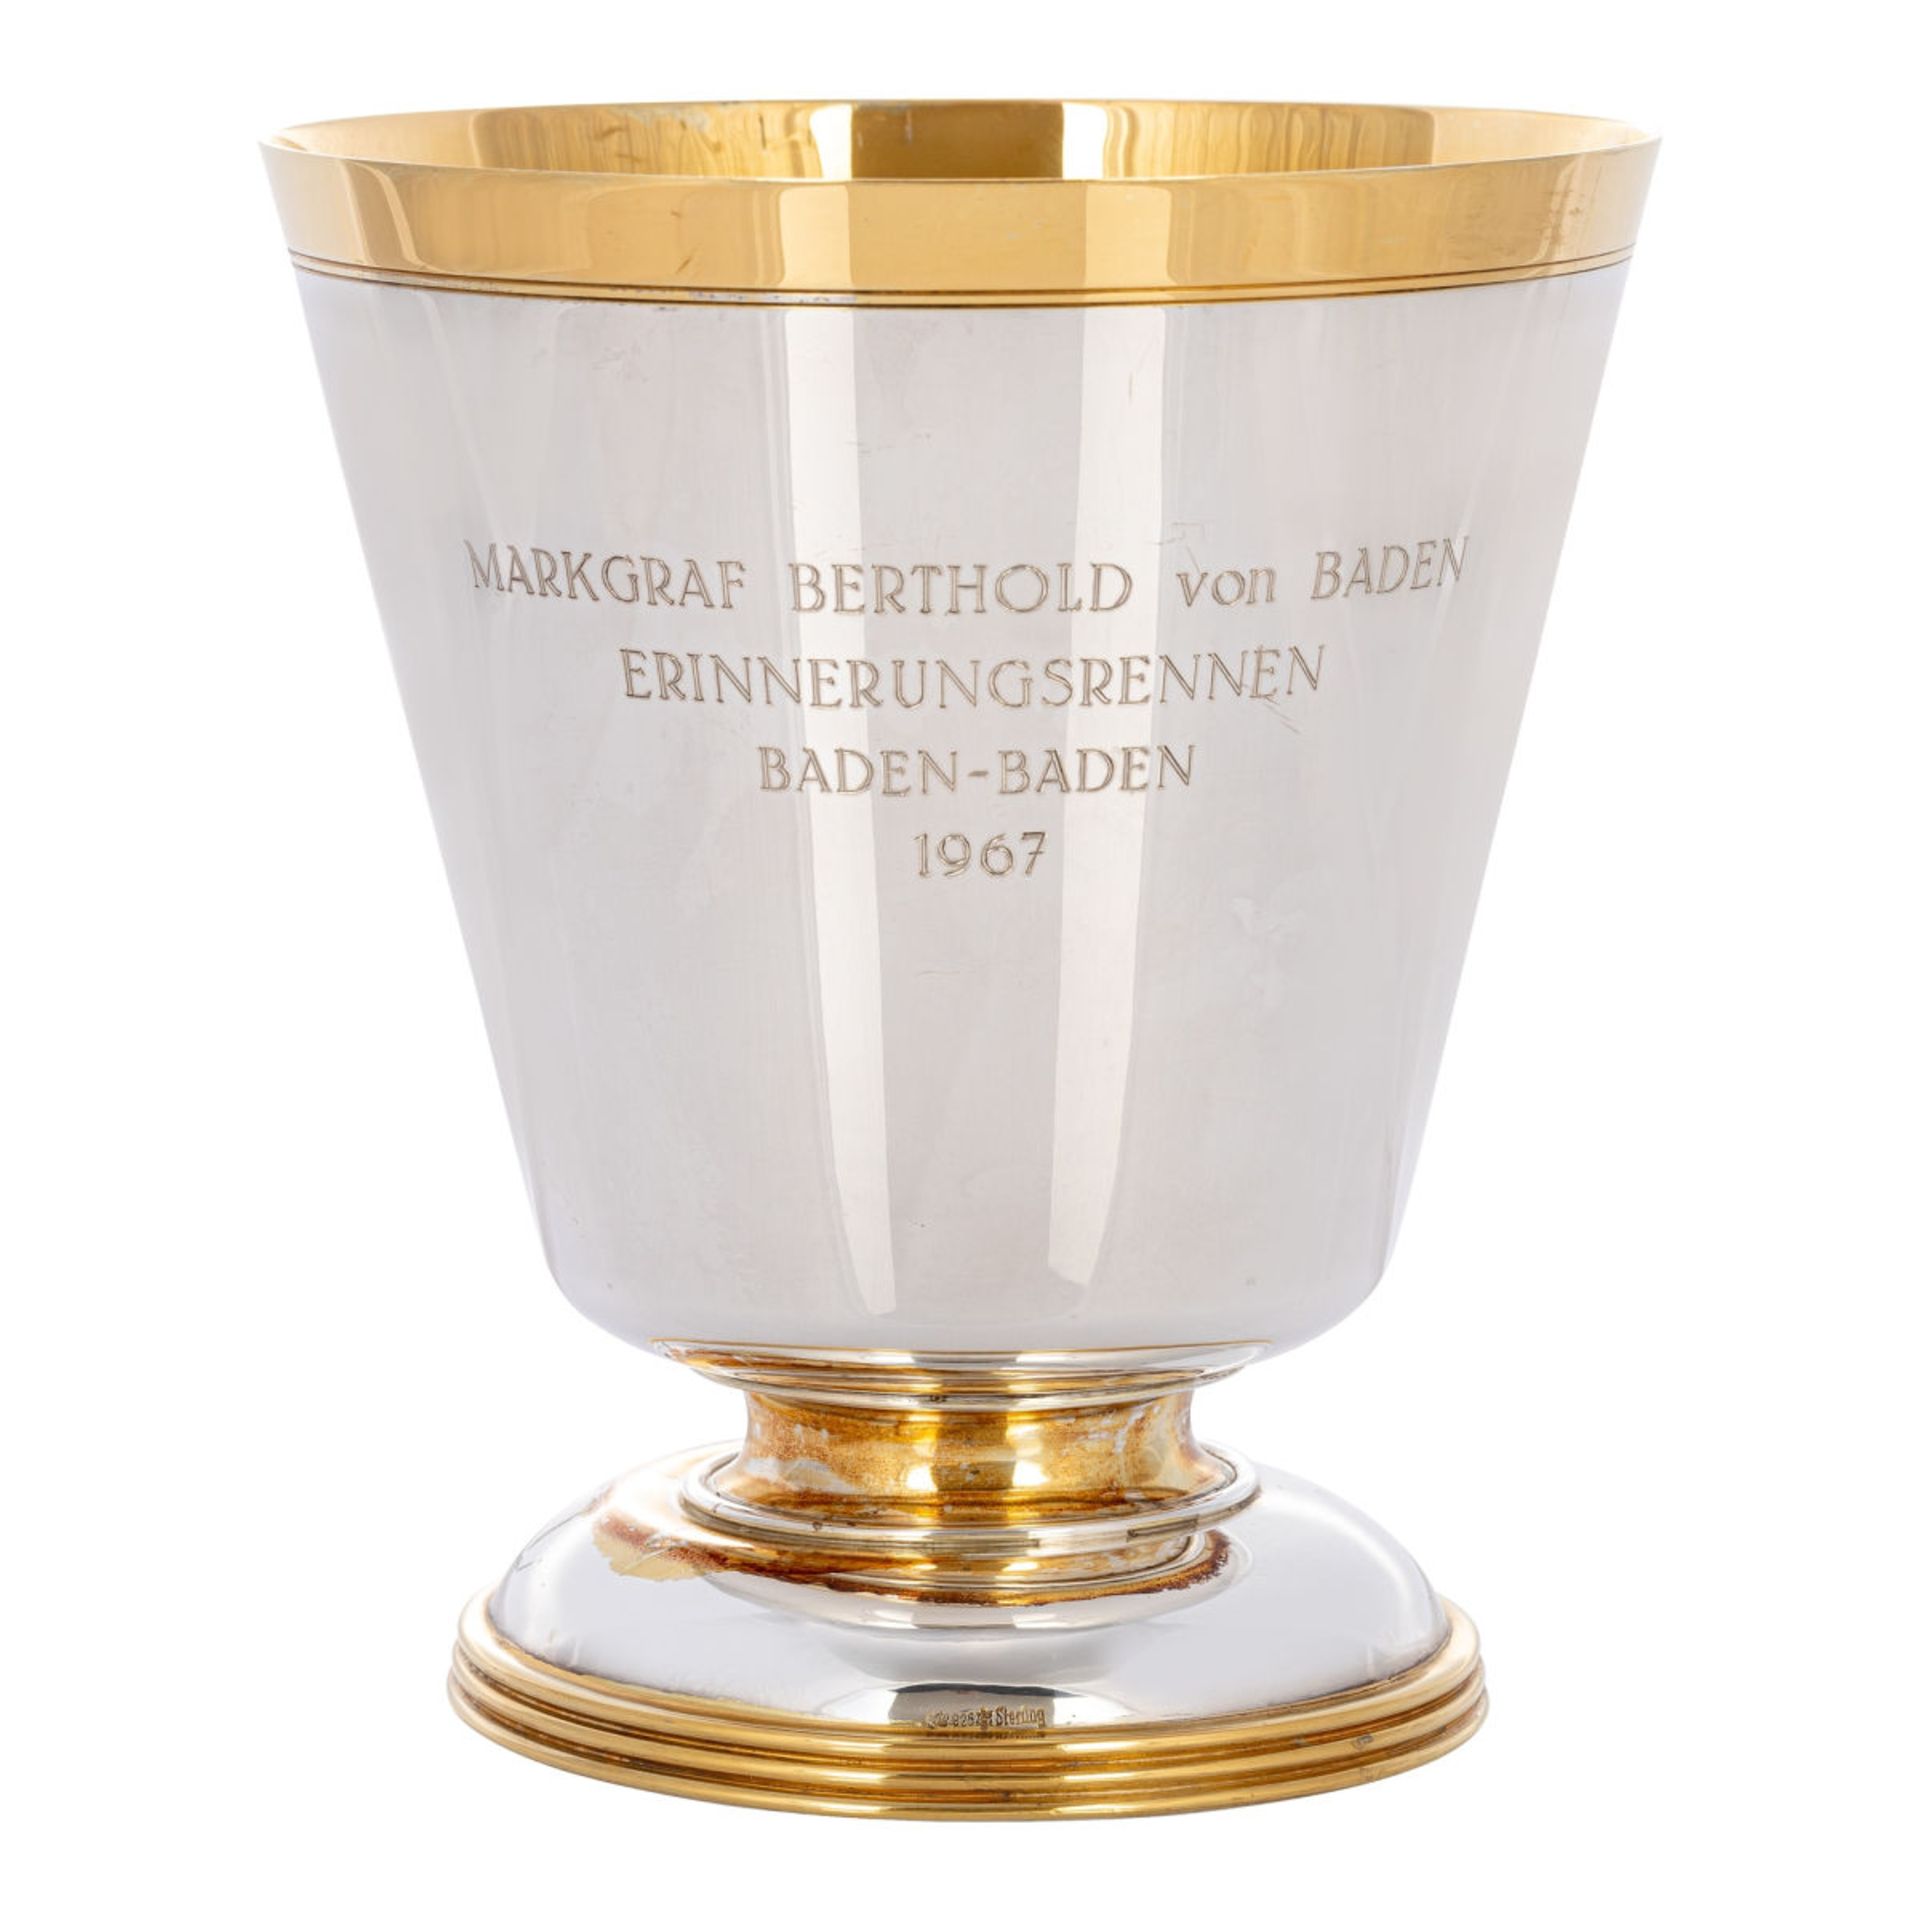 Margravial horse racing cup from Baden-Baden - Image 2 of 3